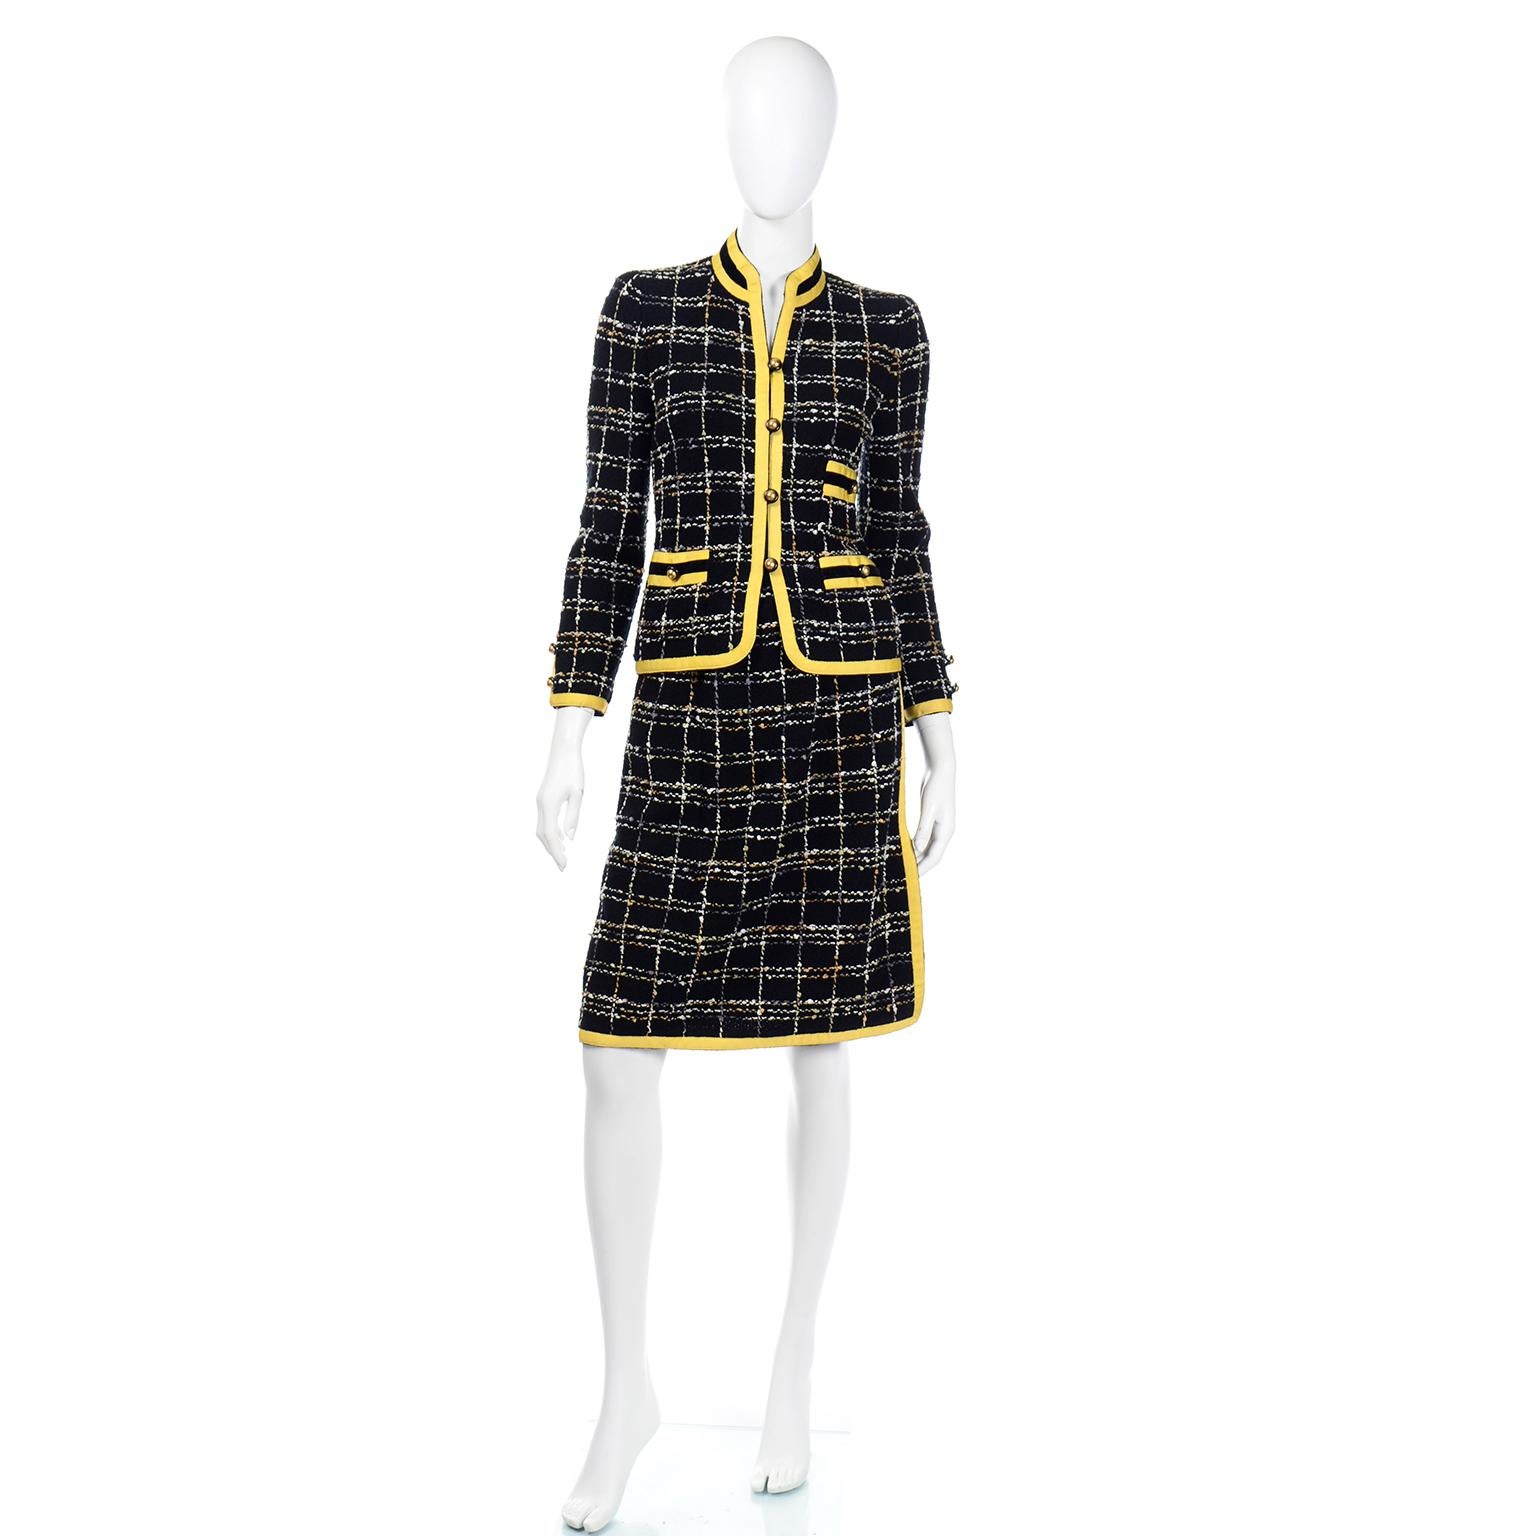 This is a wonderful Adolfo two piece colorful wool knit skirt and jacket suit with pretty bright yellow grosgrain ribbon trim. The trim has black velvet details on the pockets and collar. The jacket closes with pretty gold buttons and it has 3